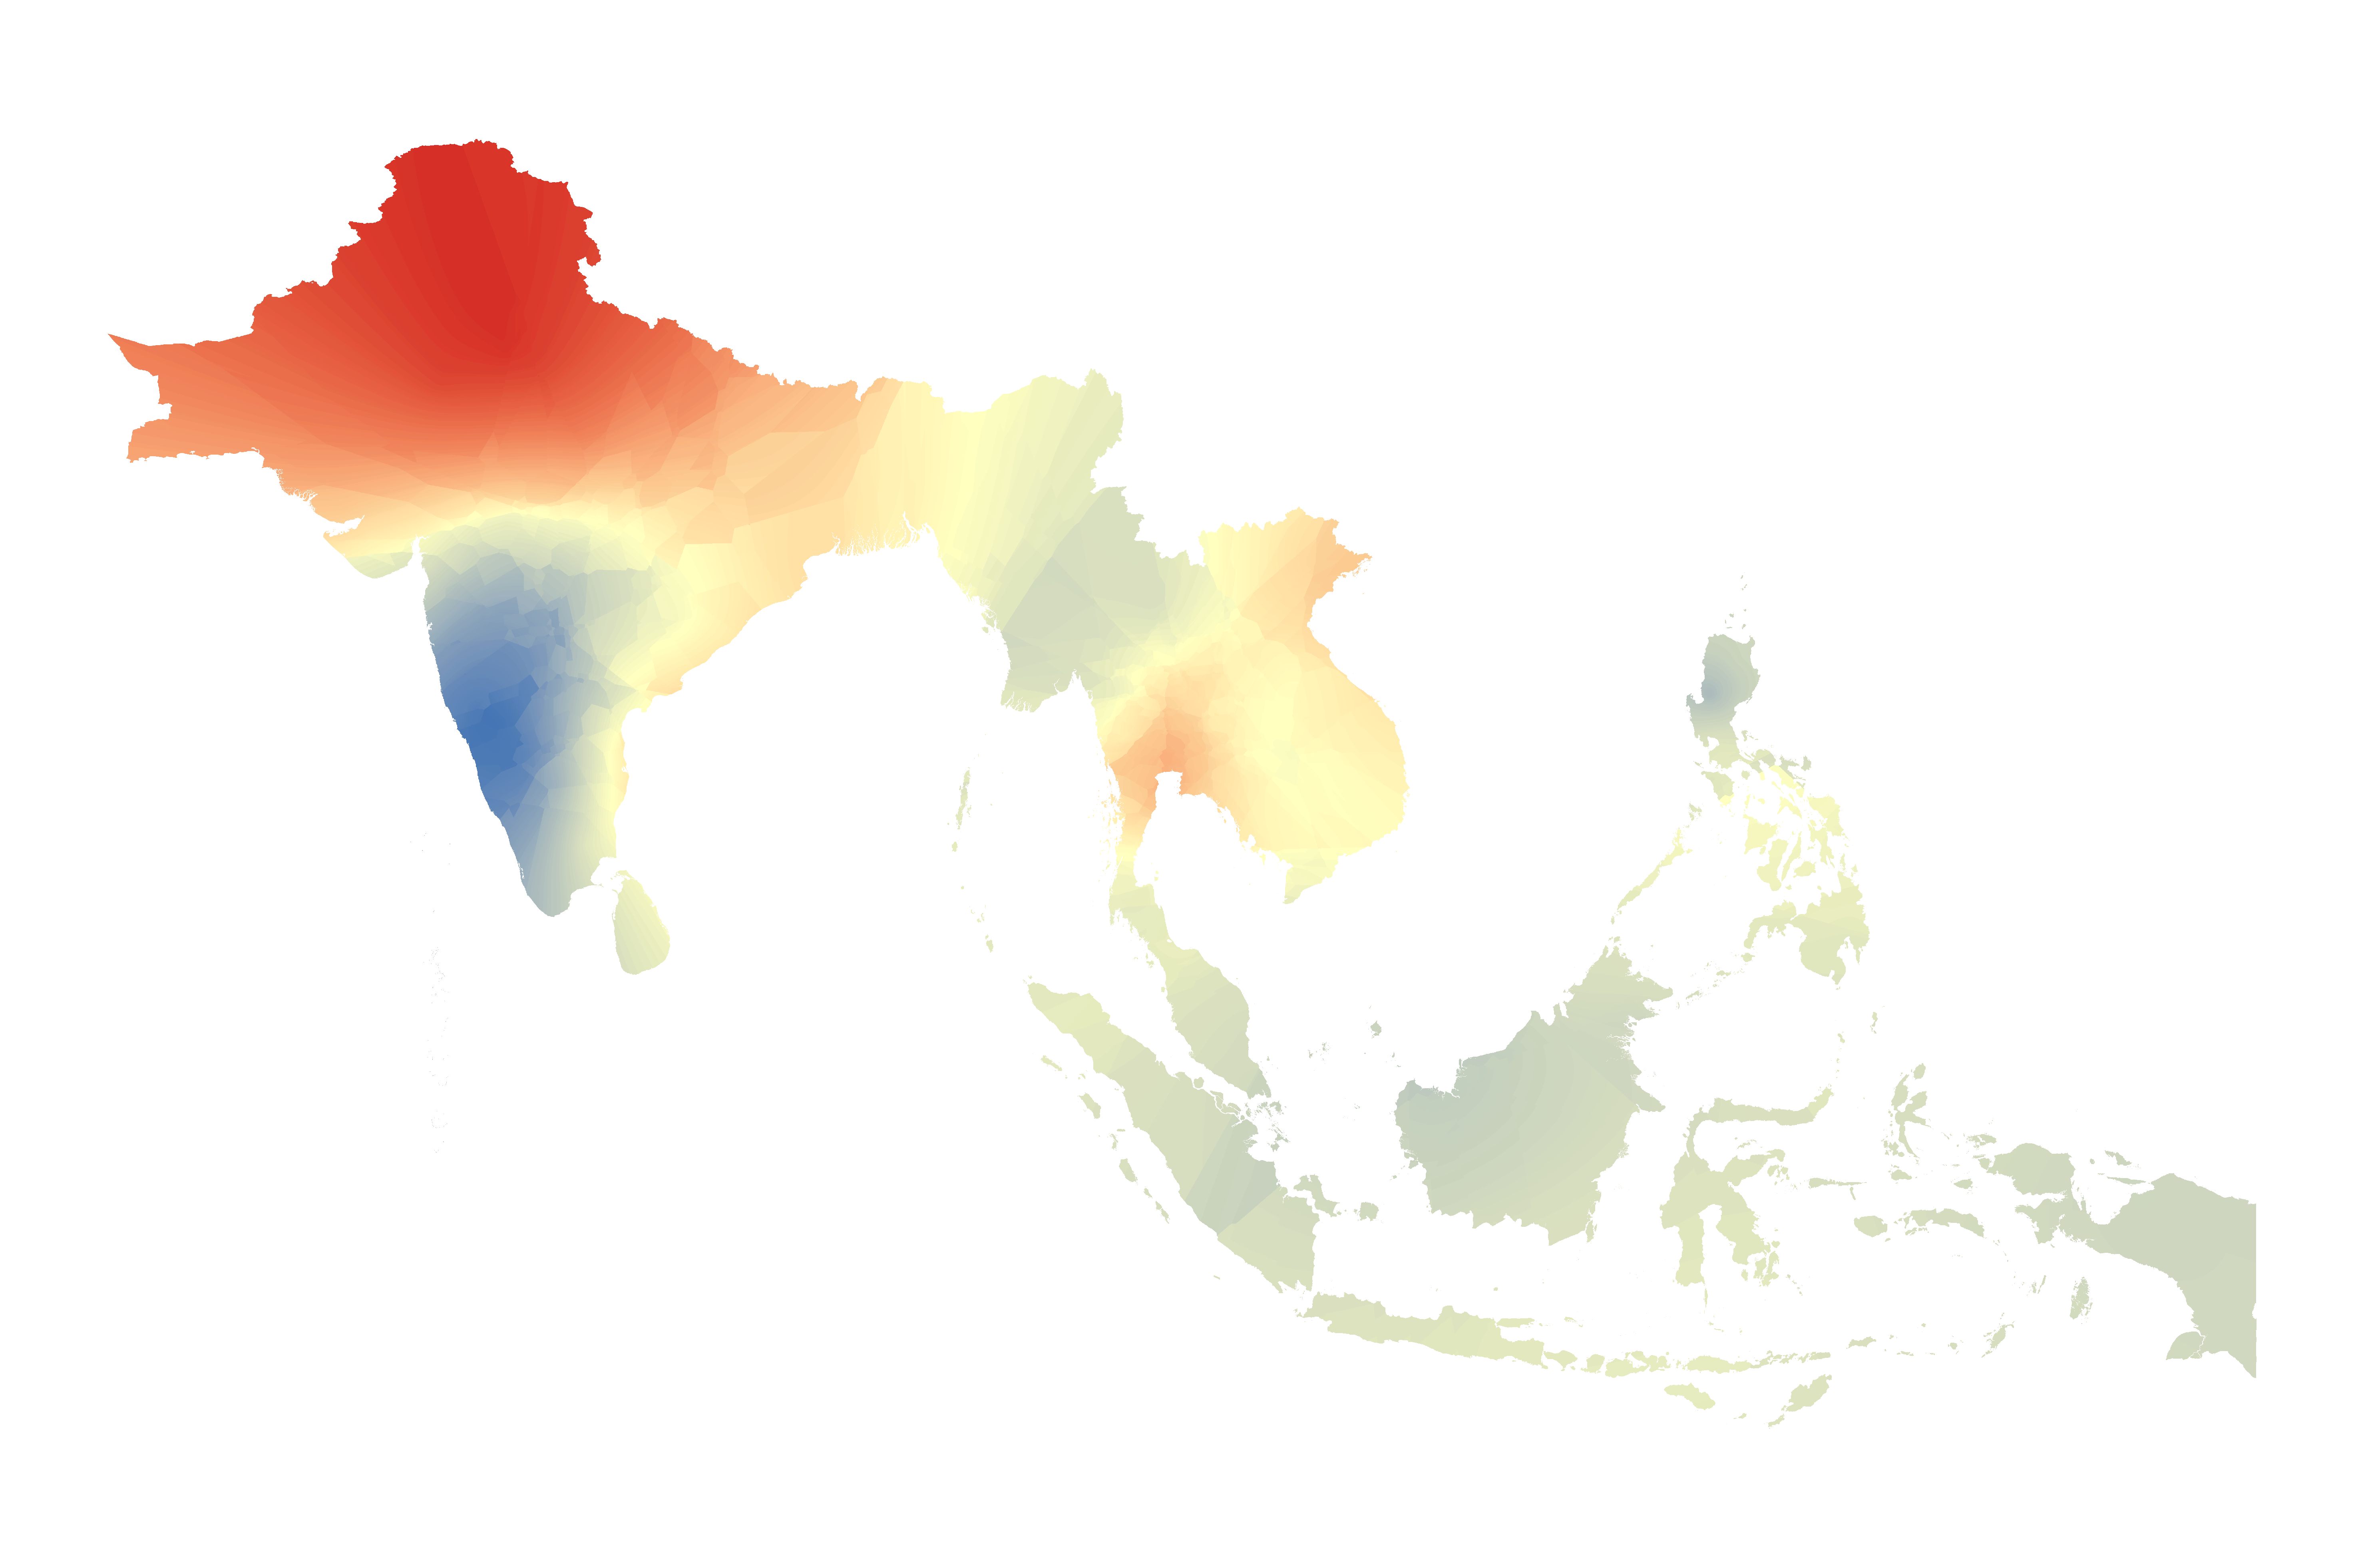 Monthly minimum temperature monitoring data set for south and southeast Asia(1989-2018)